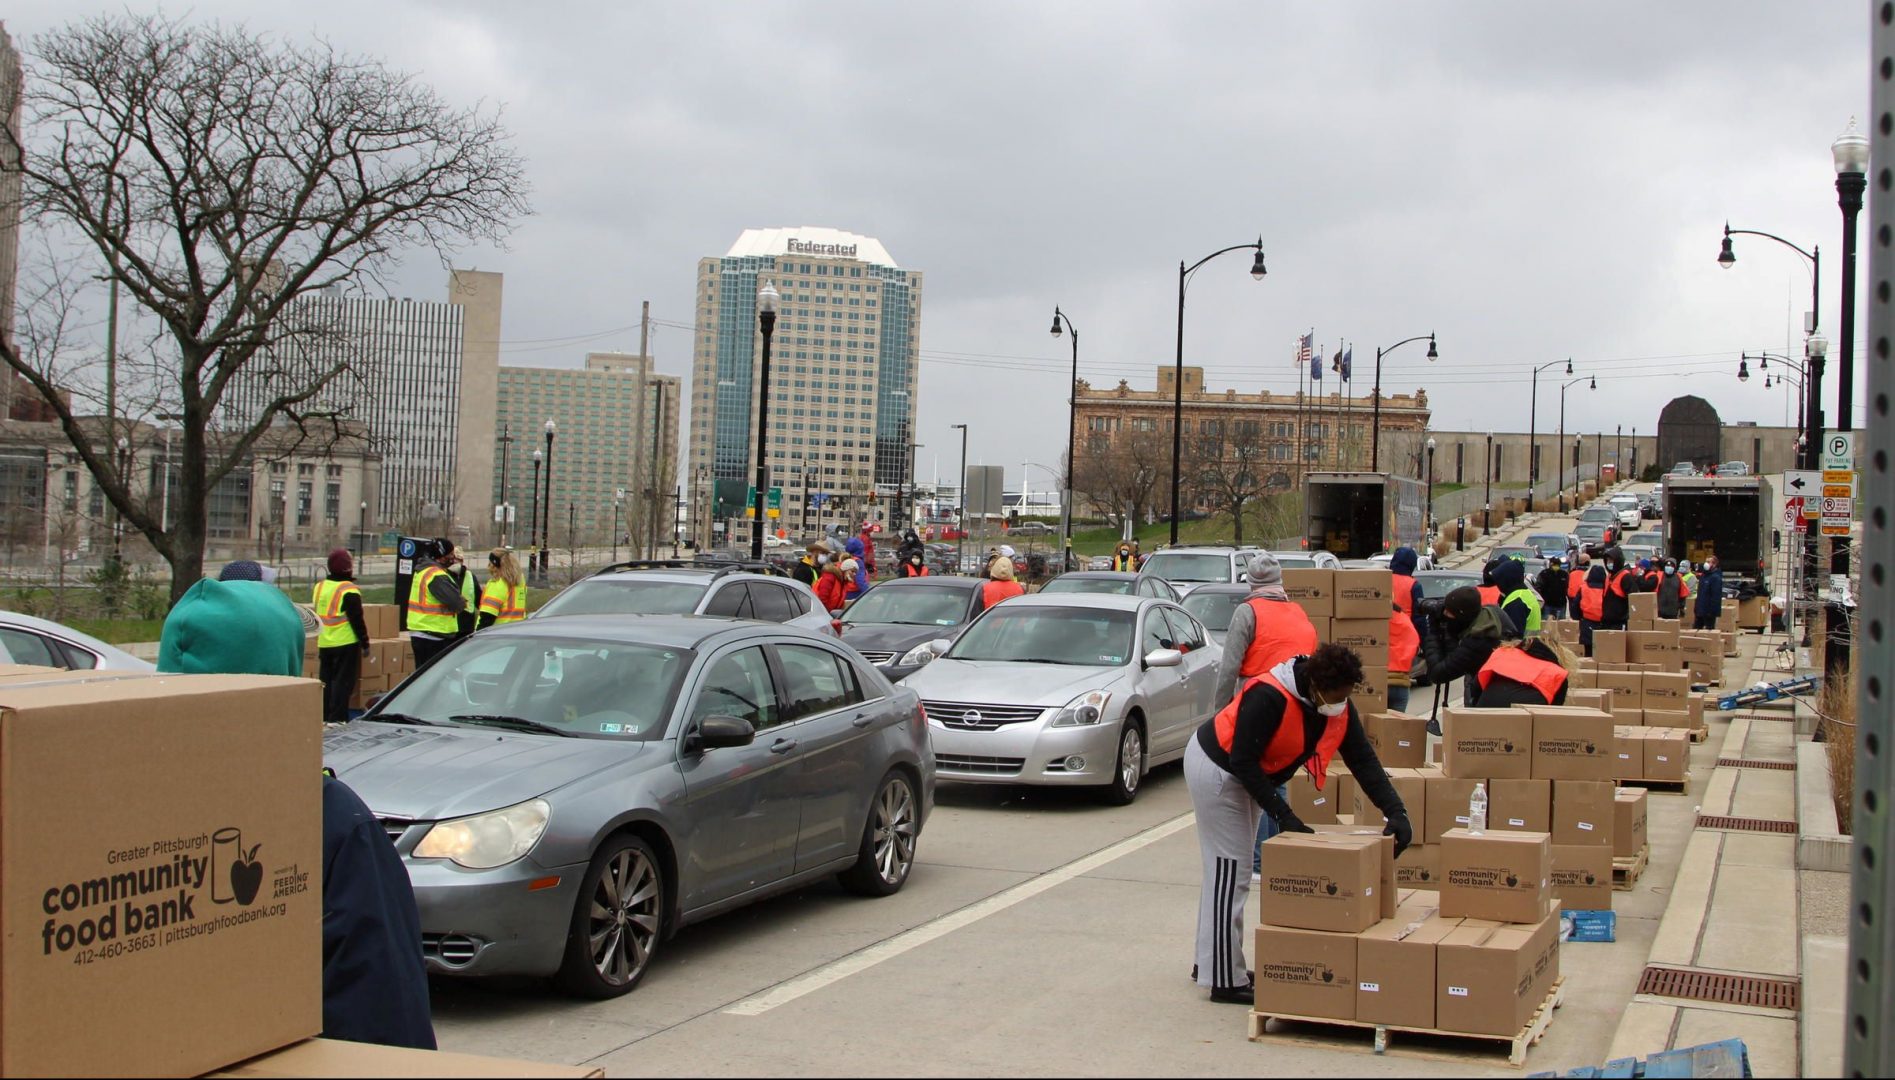 Volunteers distribute boxes of food to a long line of people at an event on April 10, 2020.